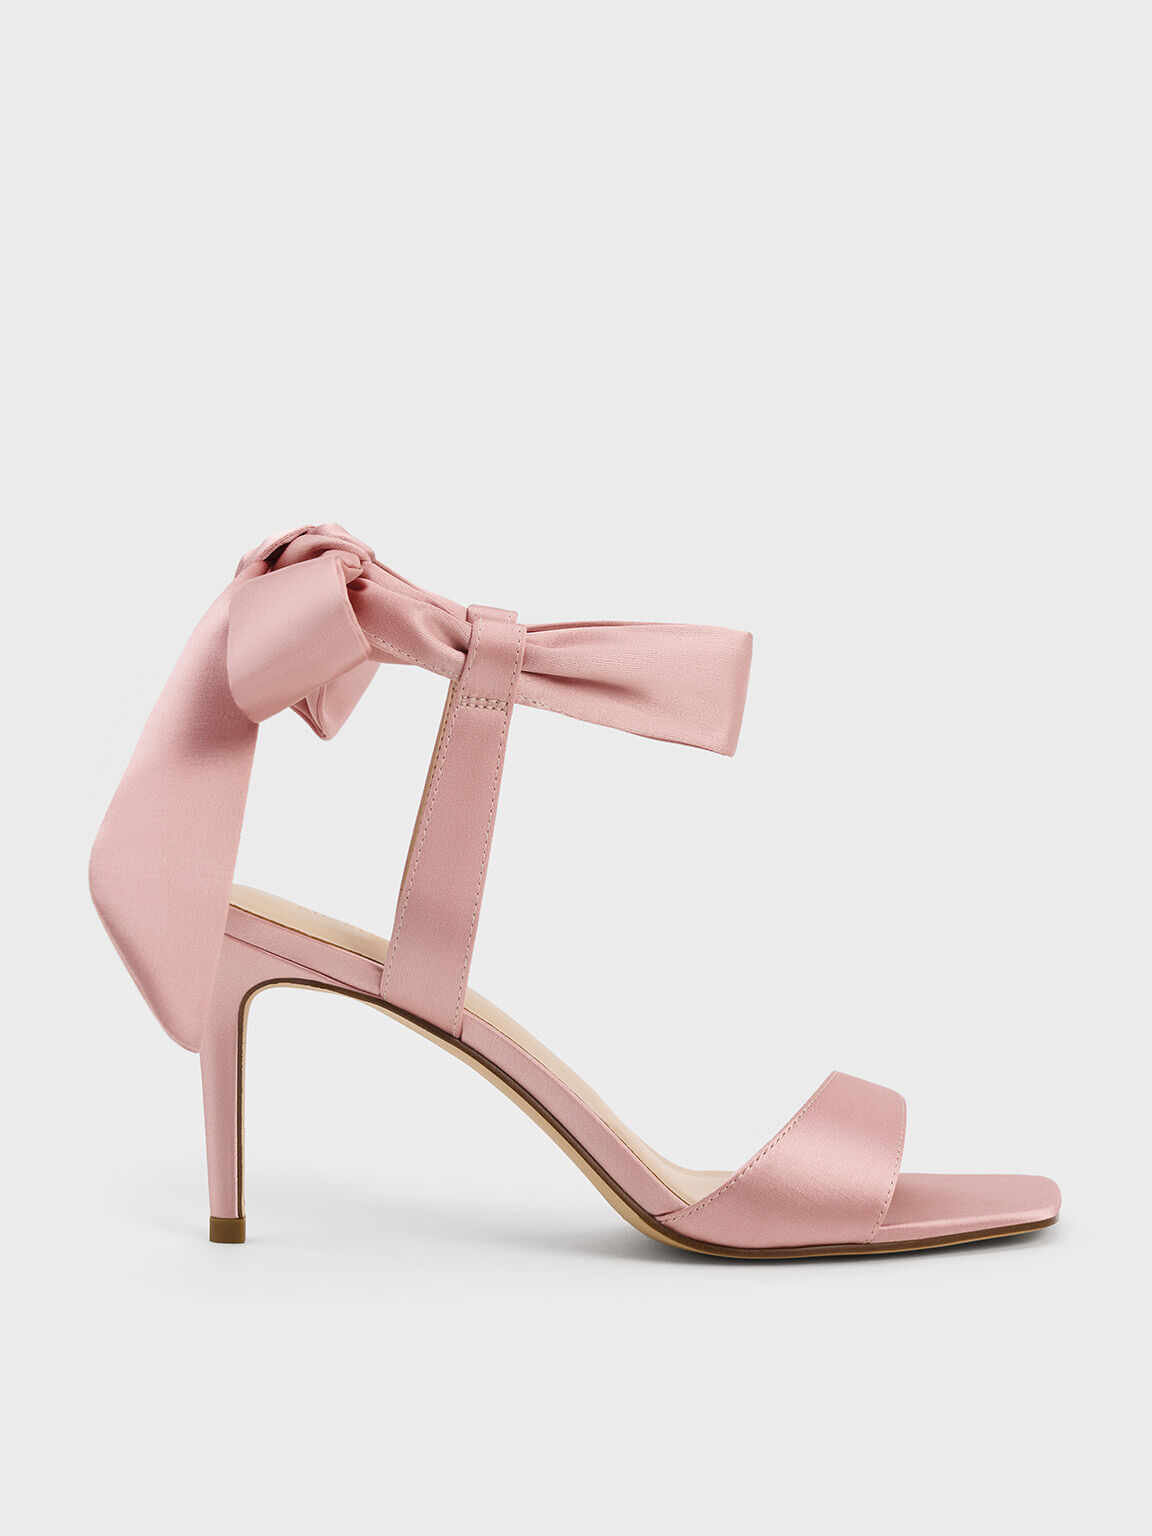 Lola Pink Sparkly Pink Shoes with Block Heels and bow – Kate Whitcomb Shoes